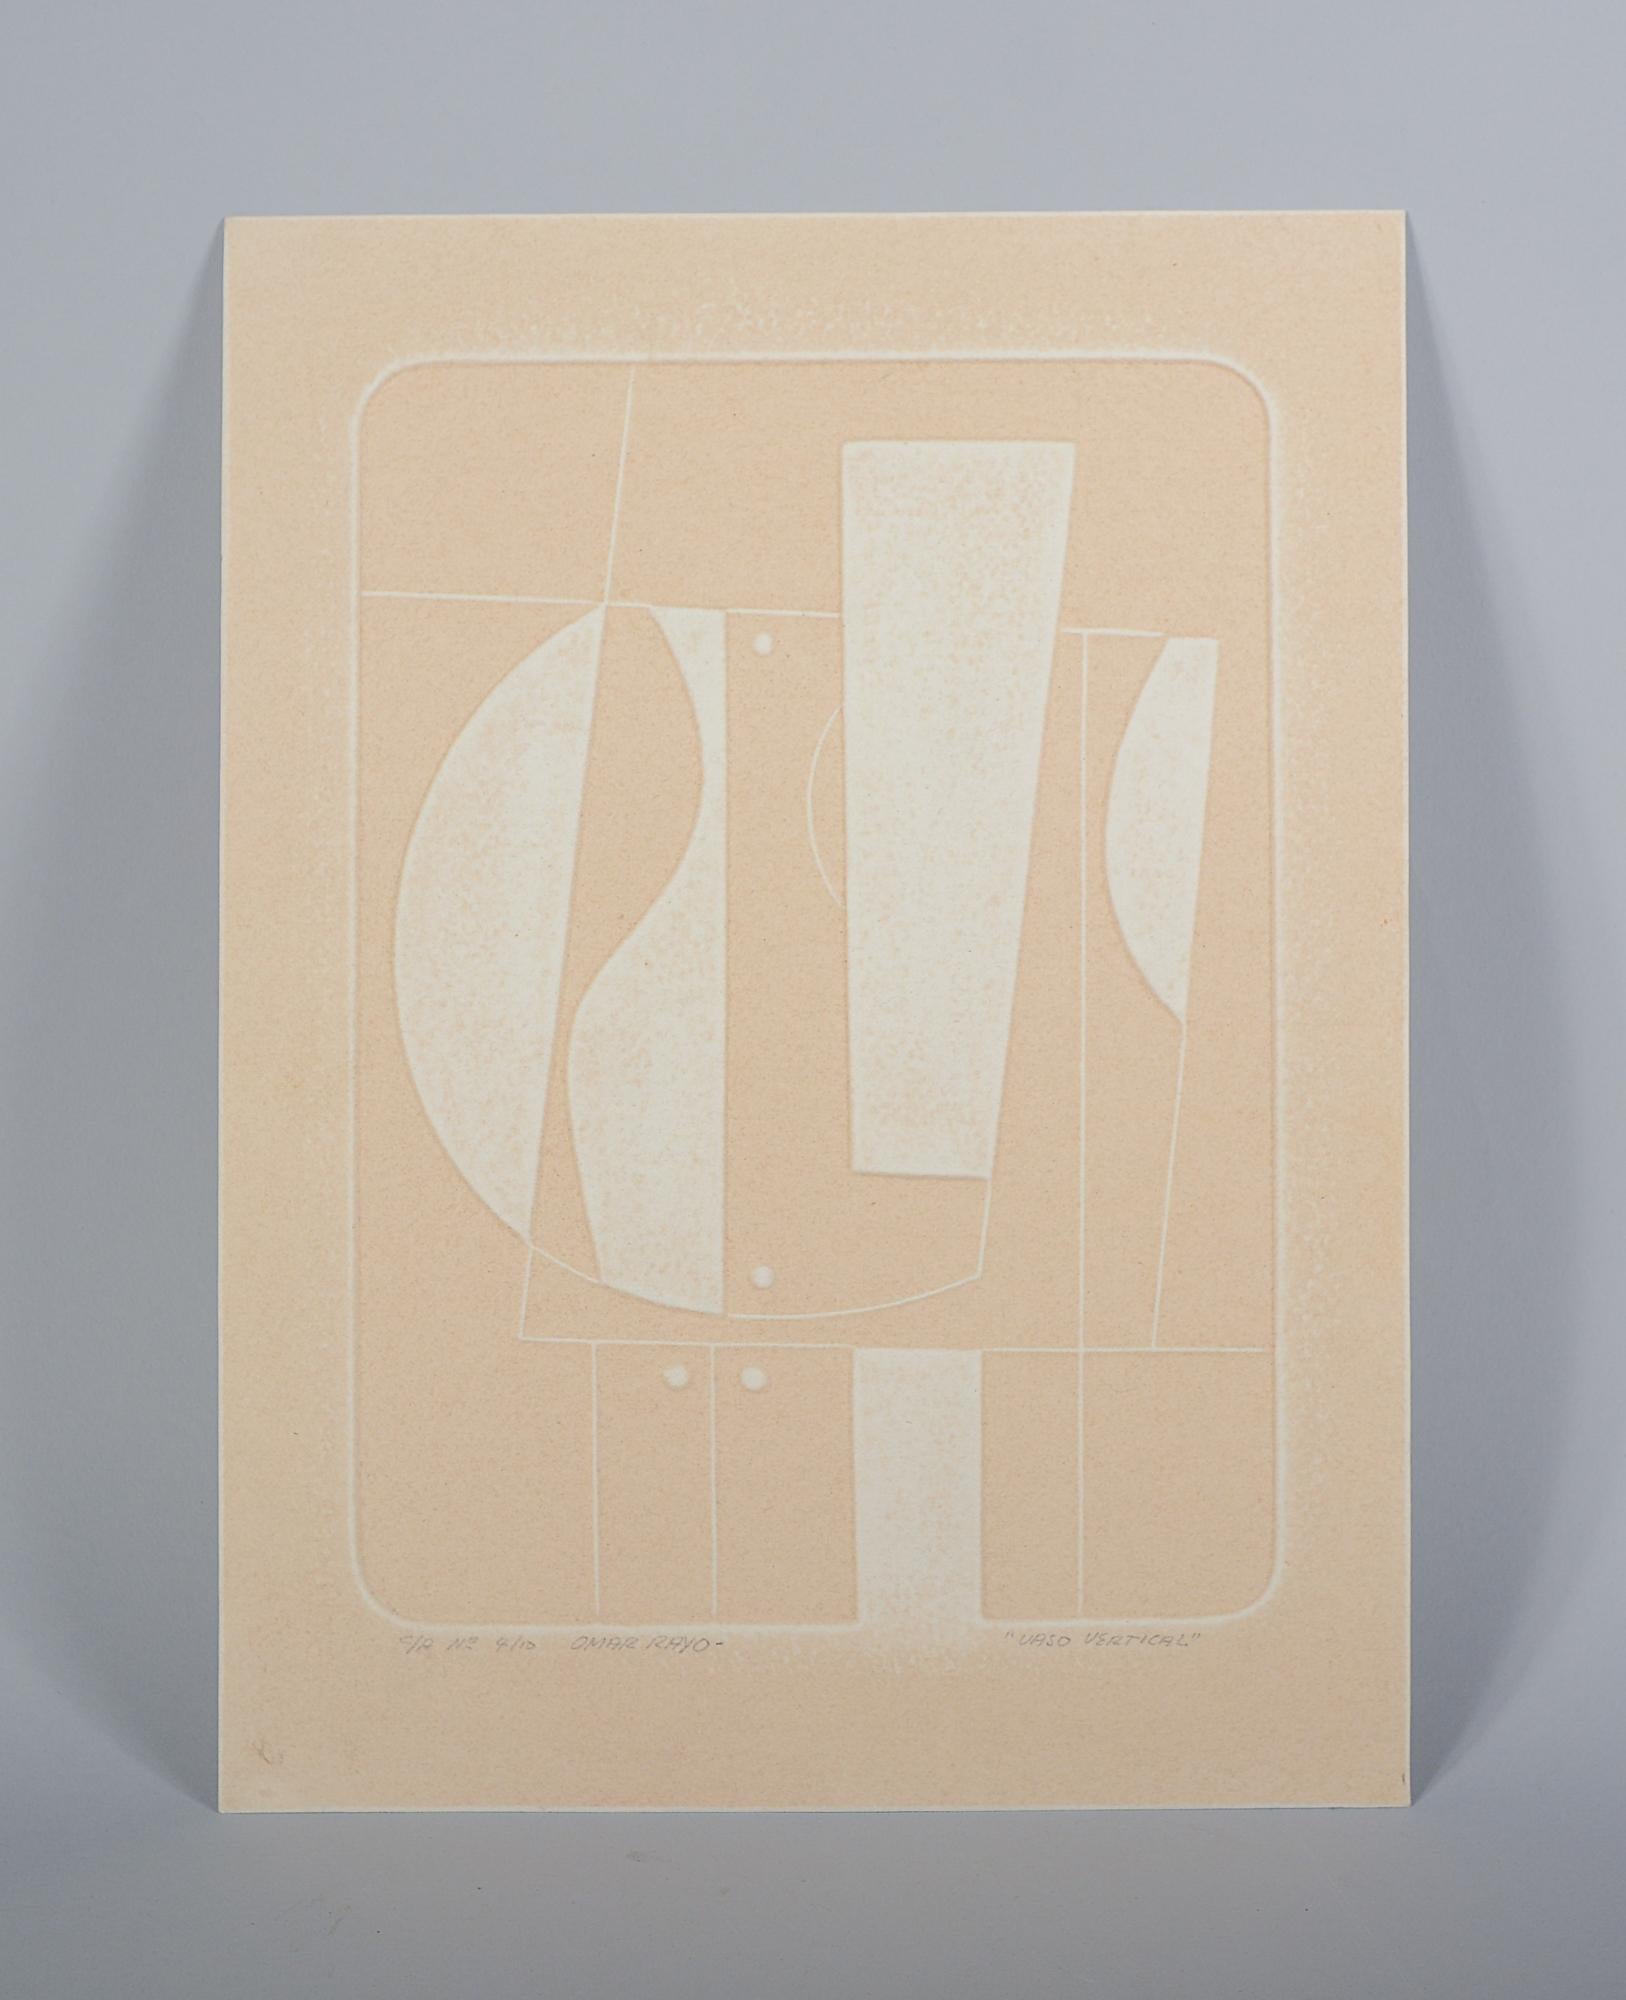 Intaglio print by Colombian artist Omar Rayo (1928-2010). This is signed in pencil lower left 